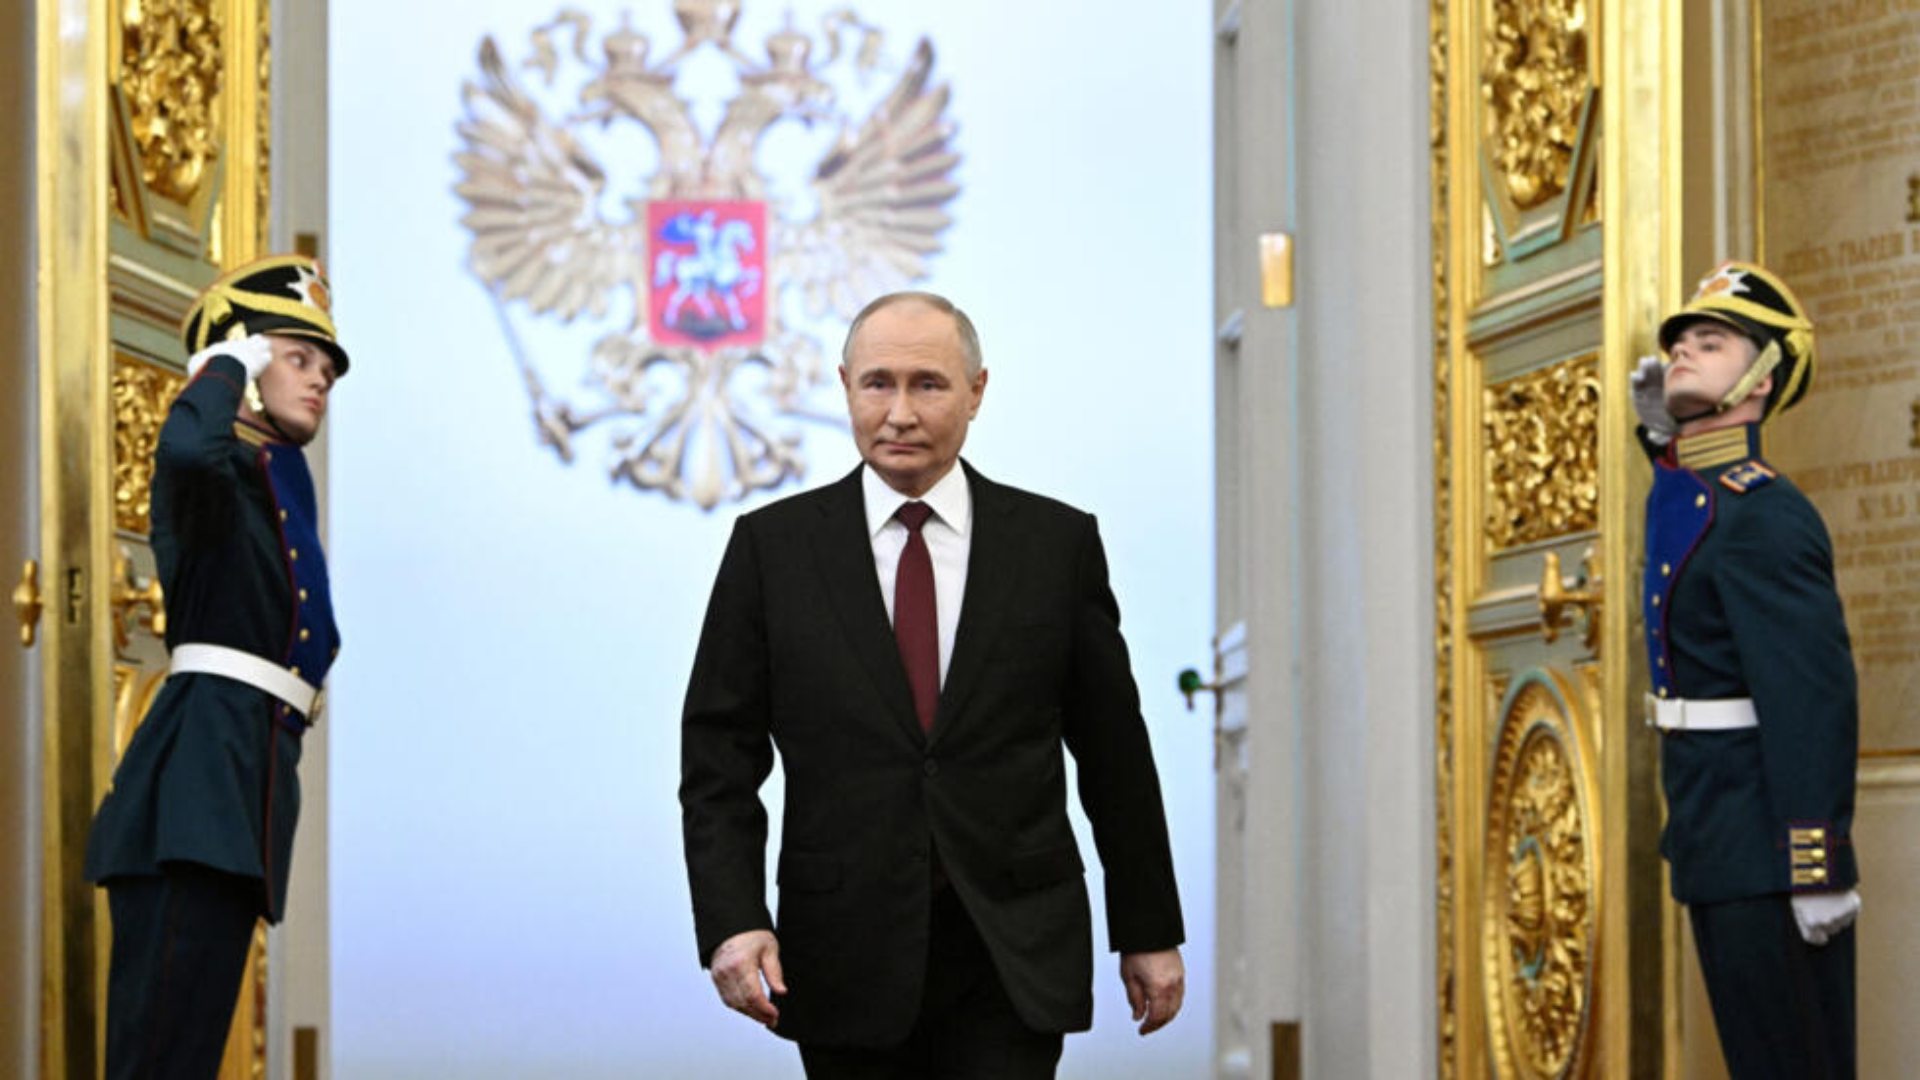 Vladimir Putin Takes Oath For Fifth Presidential Term, Setting Record In Russia